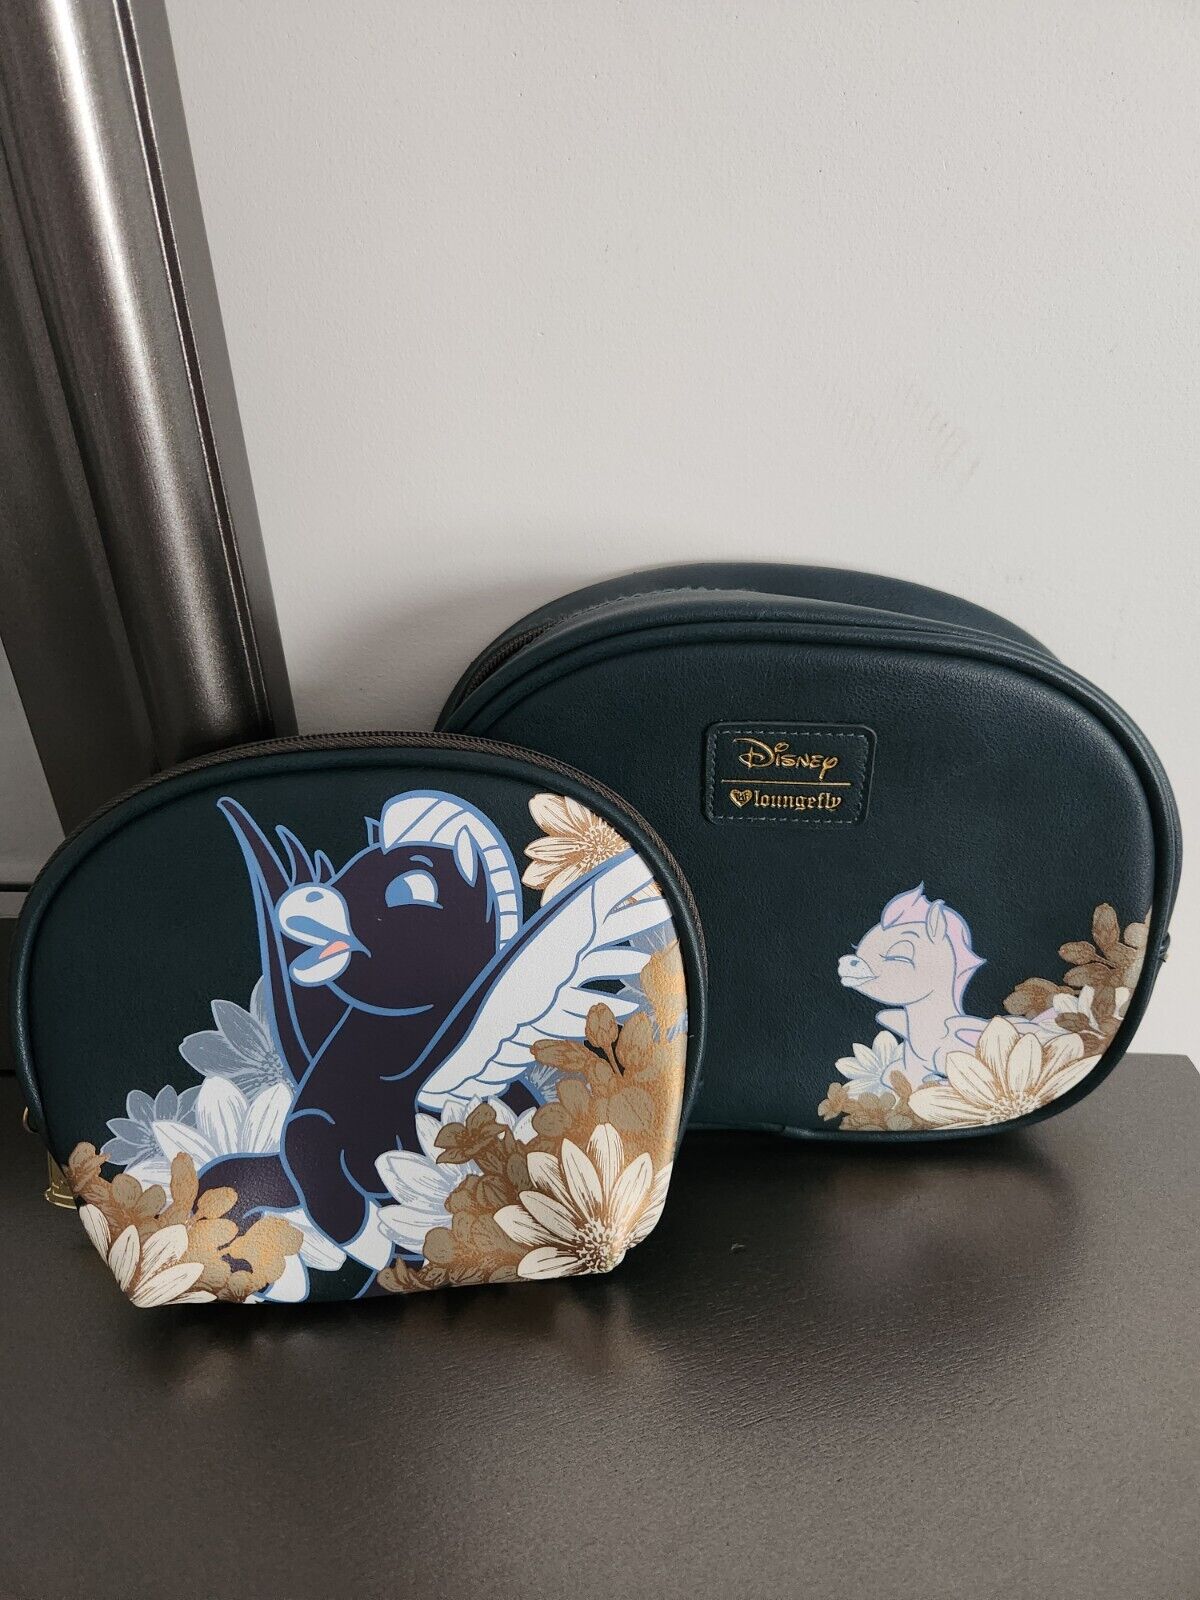 Disney Fantasia Loungefly Cosmetic Bag Set No Tags Rare AS Is See Pics 